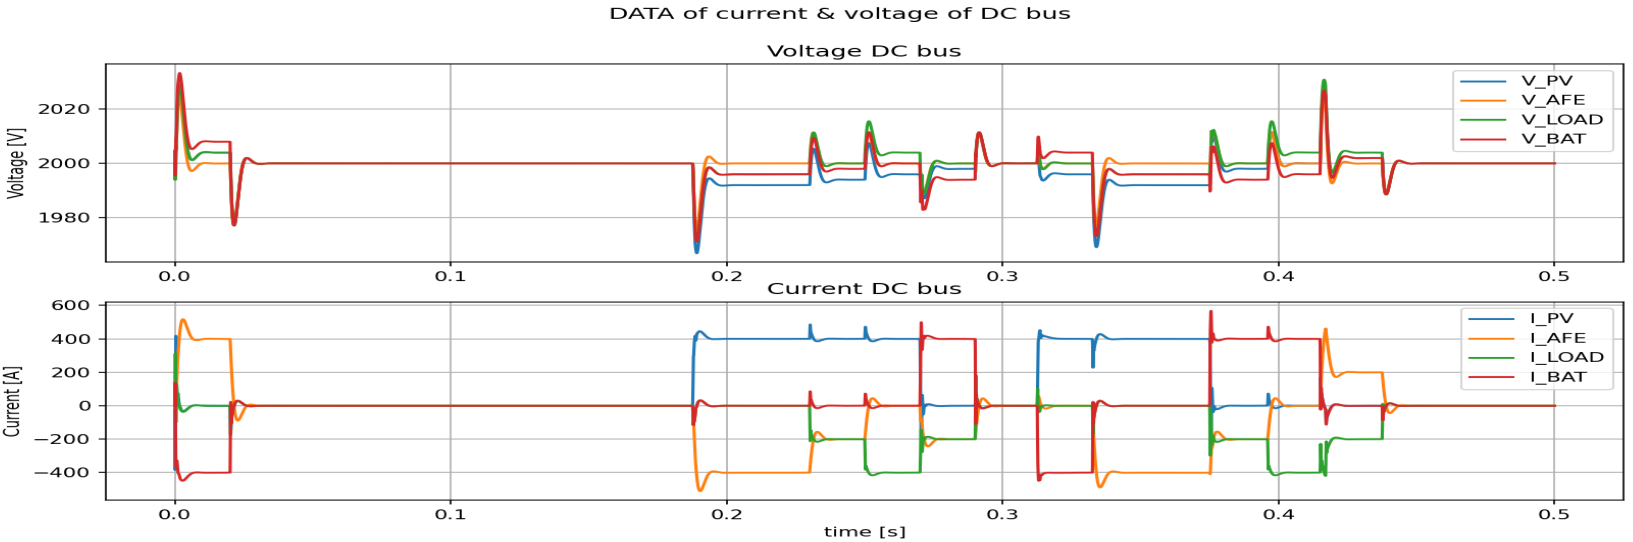 DC grid currents and voltages